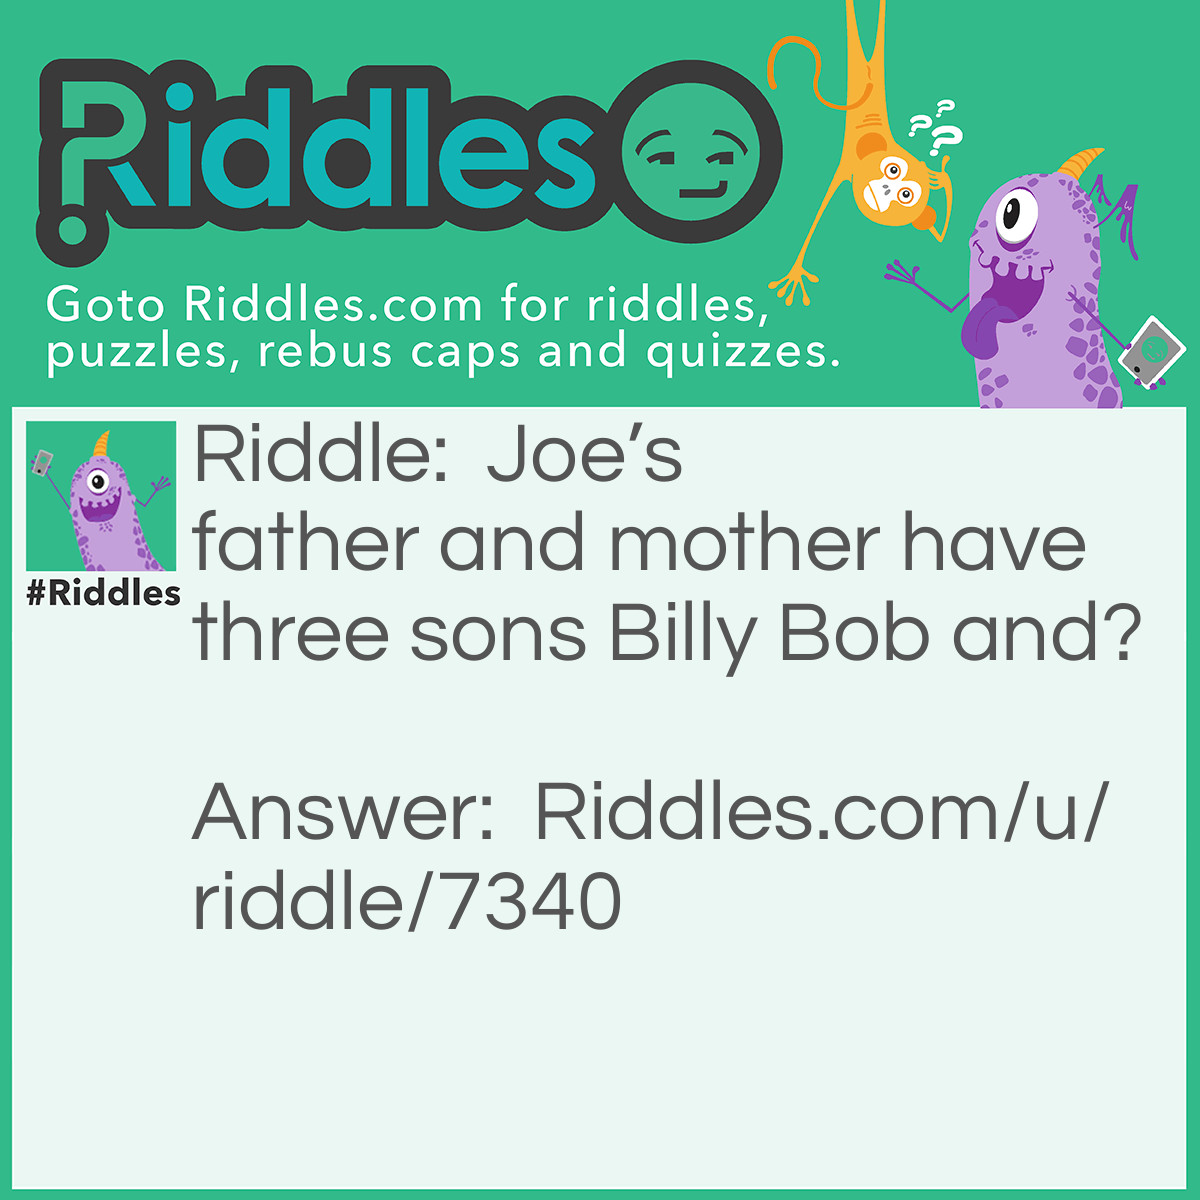 Riddle: Joe's father and mother have three sons Billy Bob and? Answer: Joe Because JOE’S father has three sons.